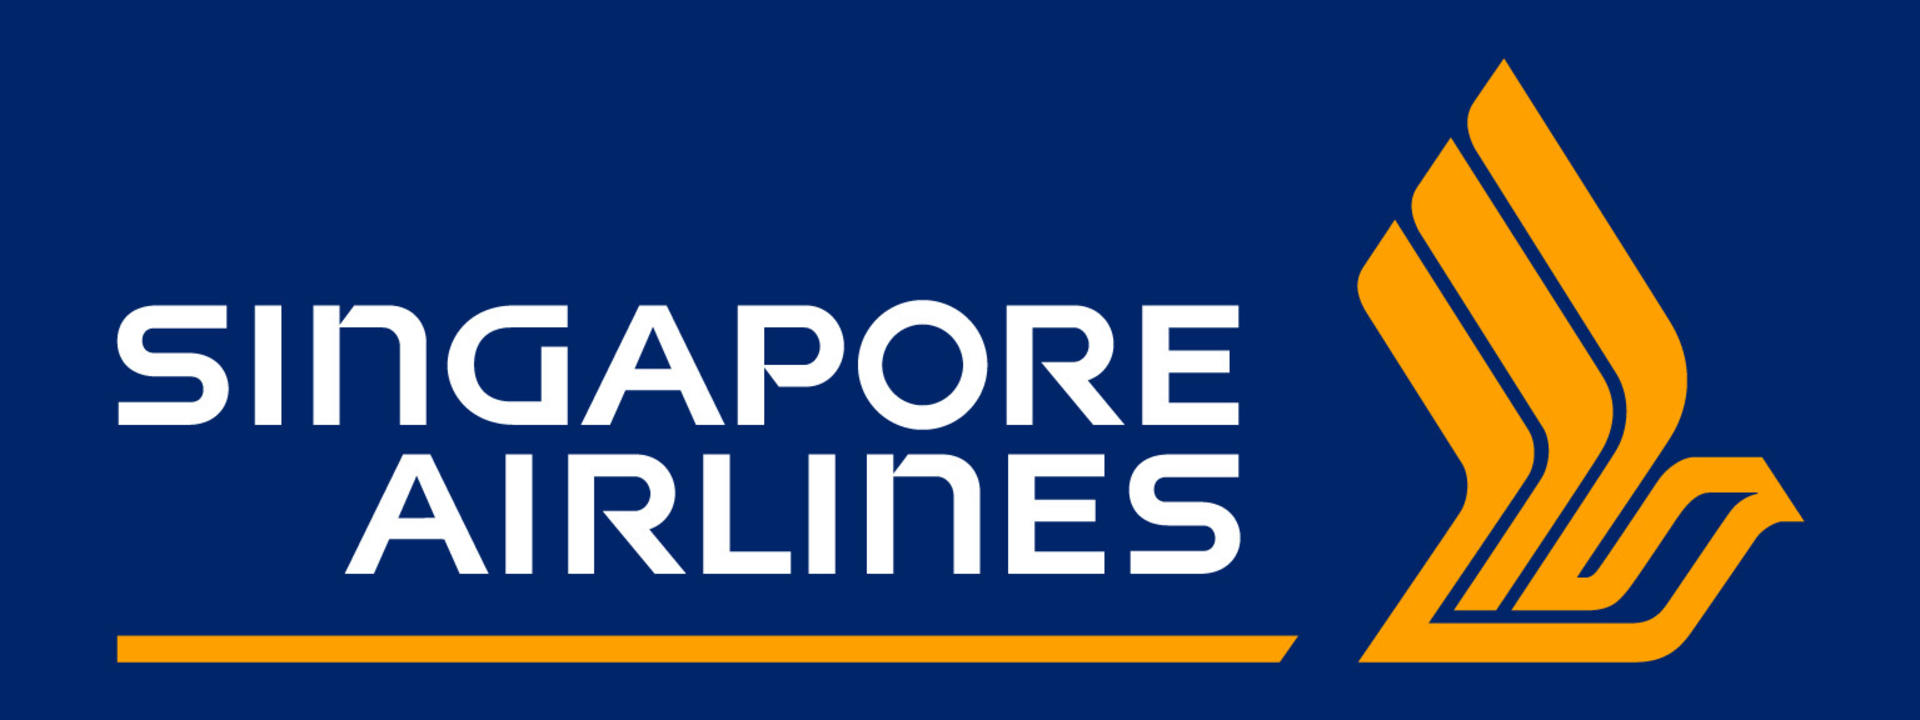 Singapore Airlines | Airlines in London, United Kingdom